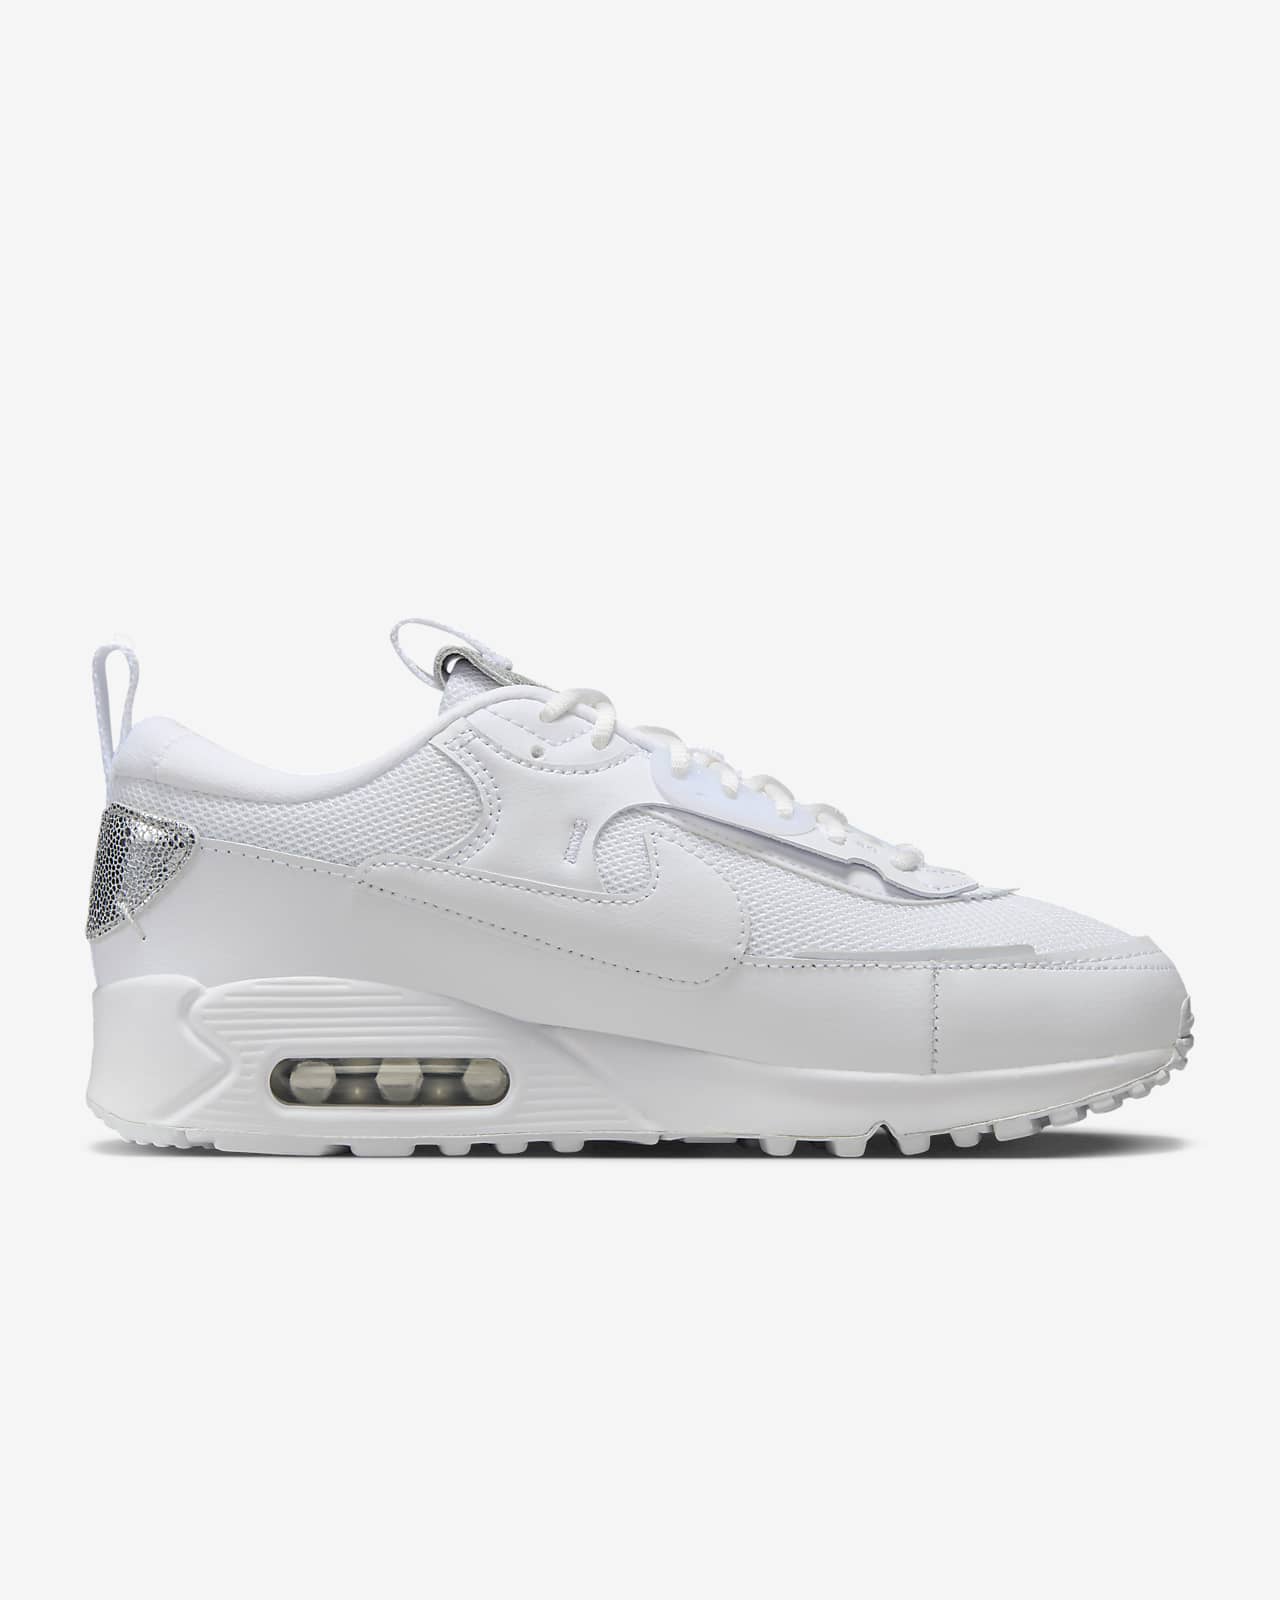 Nike Women's Air Max 90 Futura Shoes in White, Size: 5 | FQ8888-100